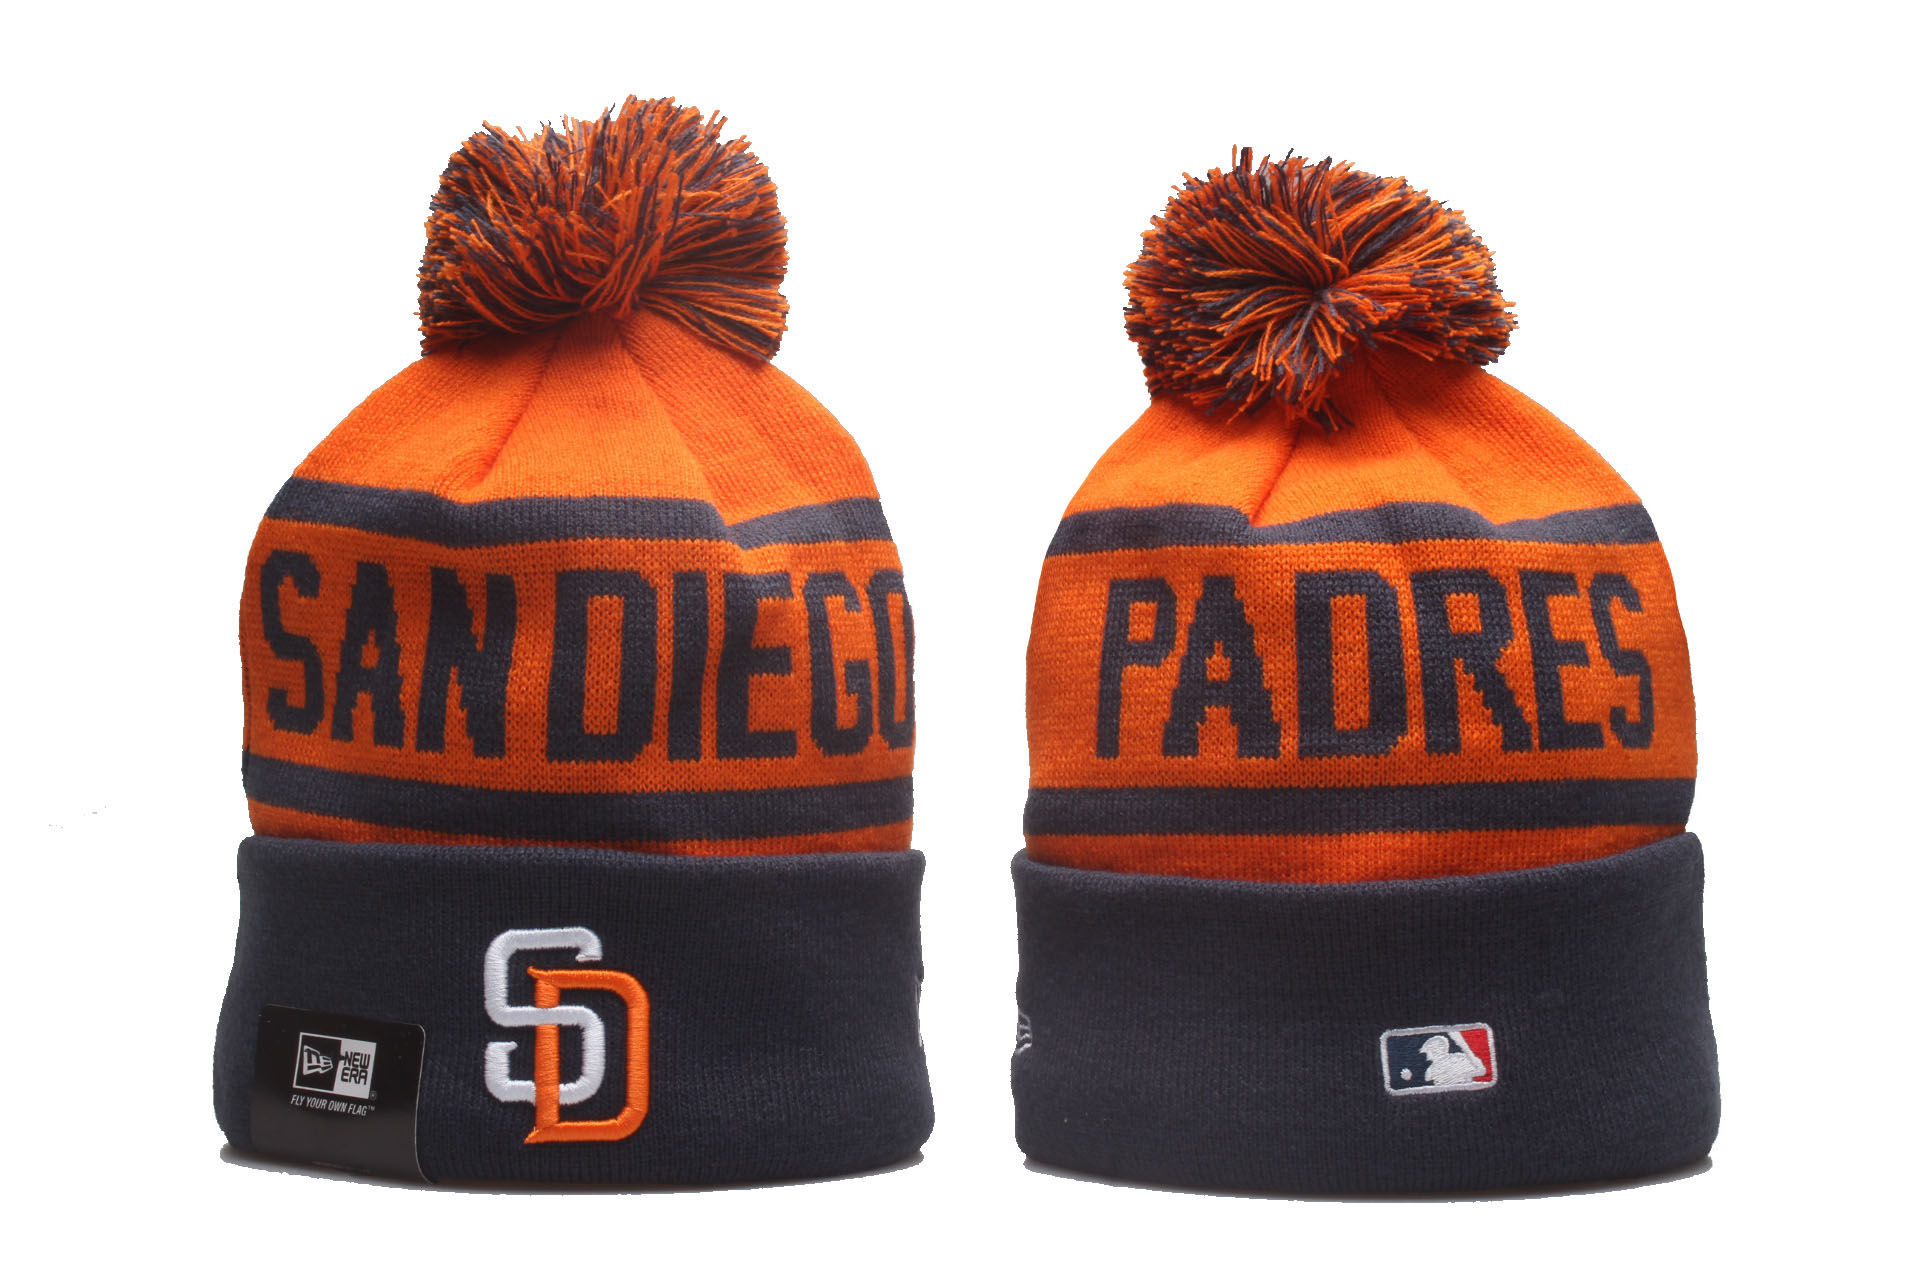 2023 MLB San Diego Padres Beanies->liverpool jersey->Soccer Club Jersey